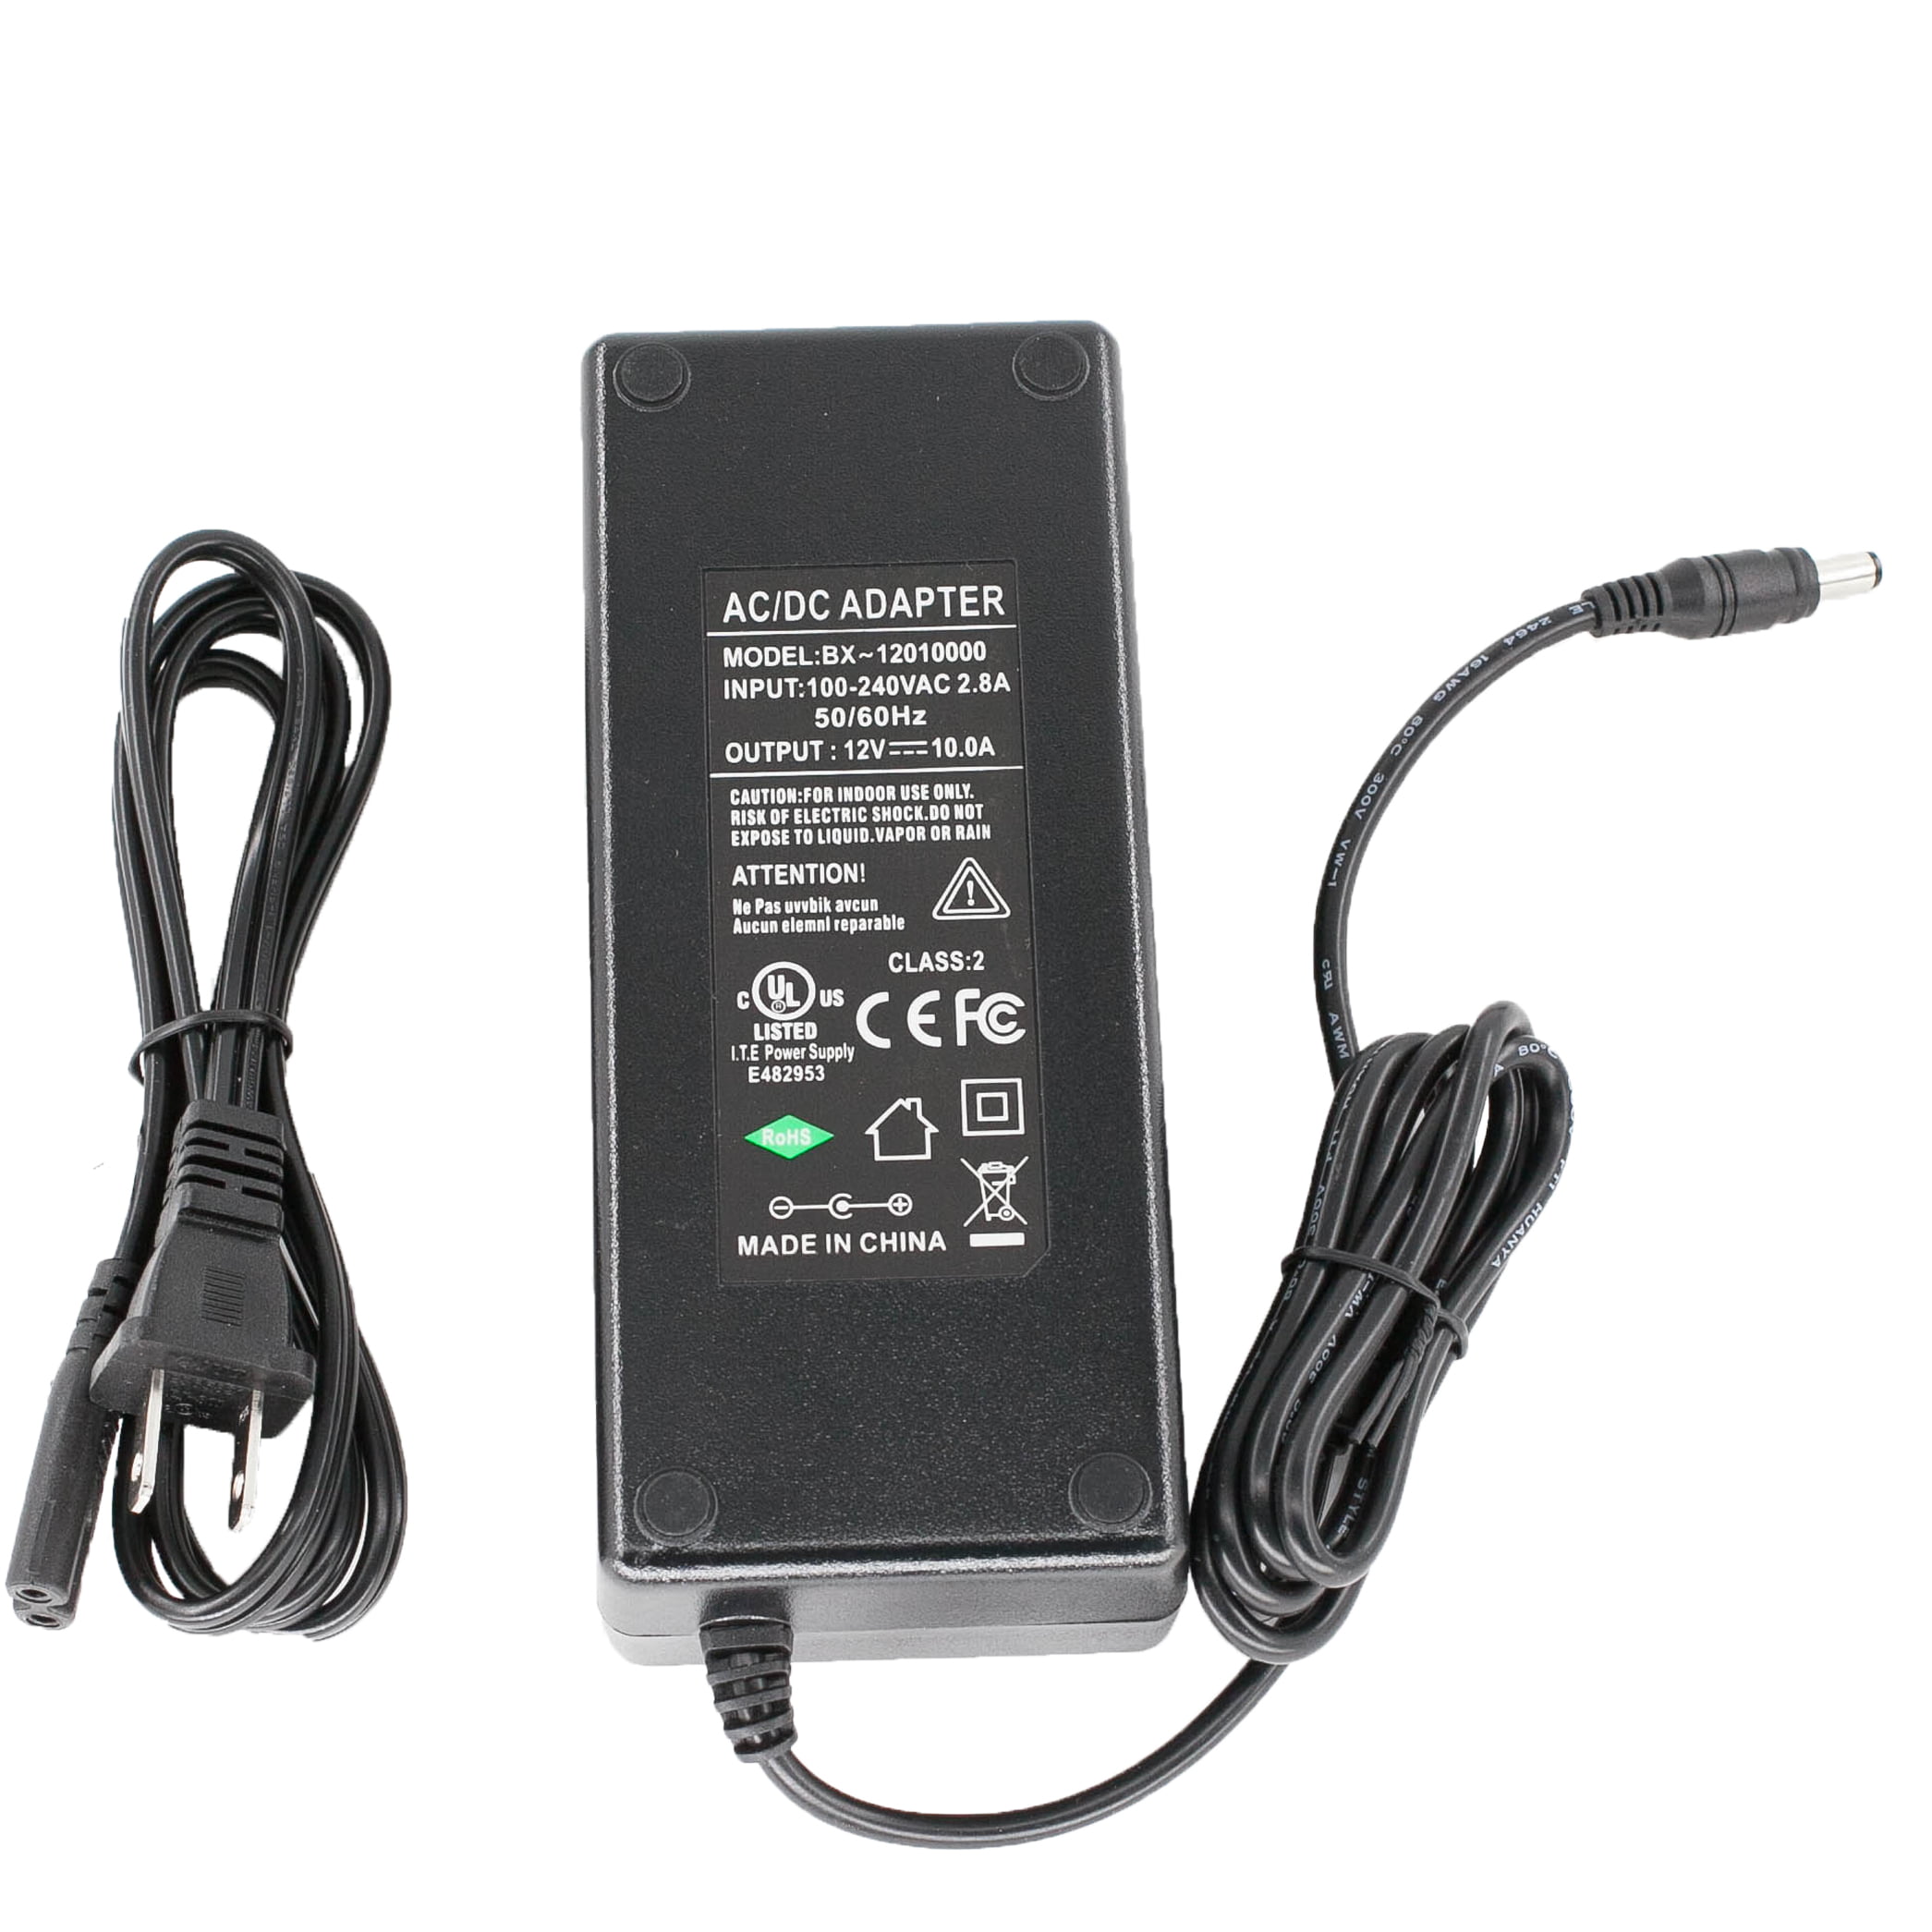 UL Listed 15V 2A Power Supply 4.8mm x 1.7mm Output Jack for AIMTOM SPS-155 and Small Electronics 100-240V AC to 15VDC 2000mA Wall Charger Replacement Adapter with 5.5mm x 2.1mm /2.5mm 3.5 x 1.35mm 